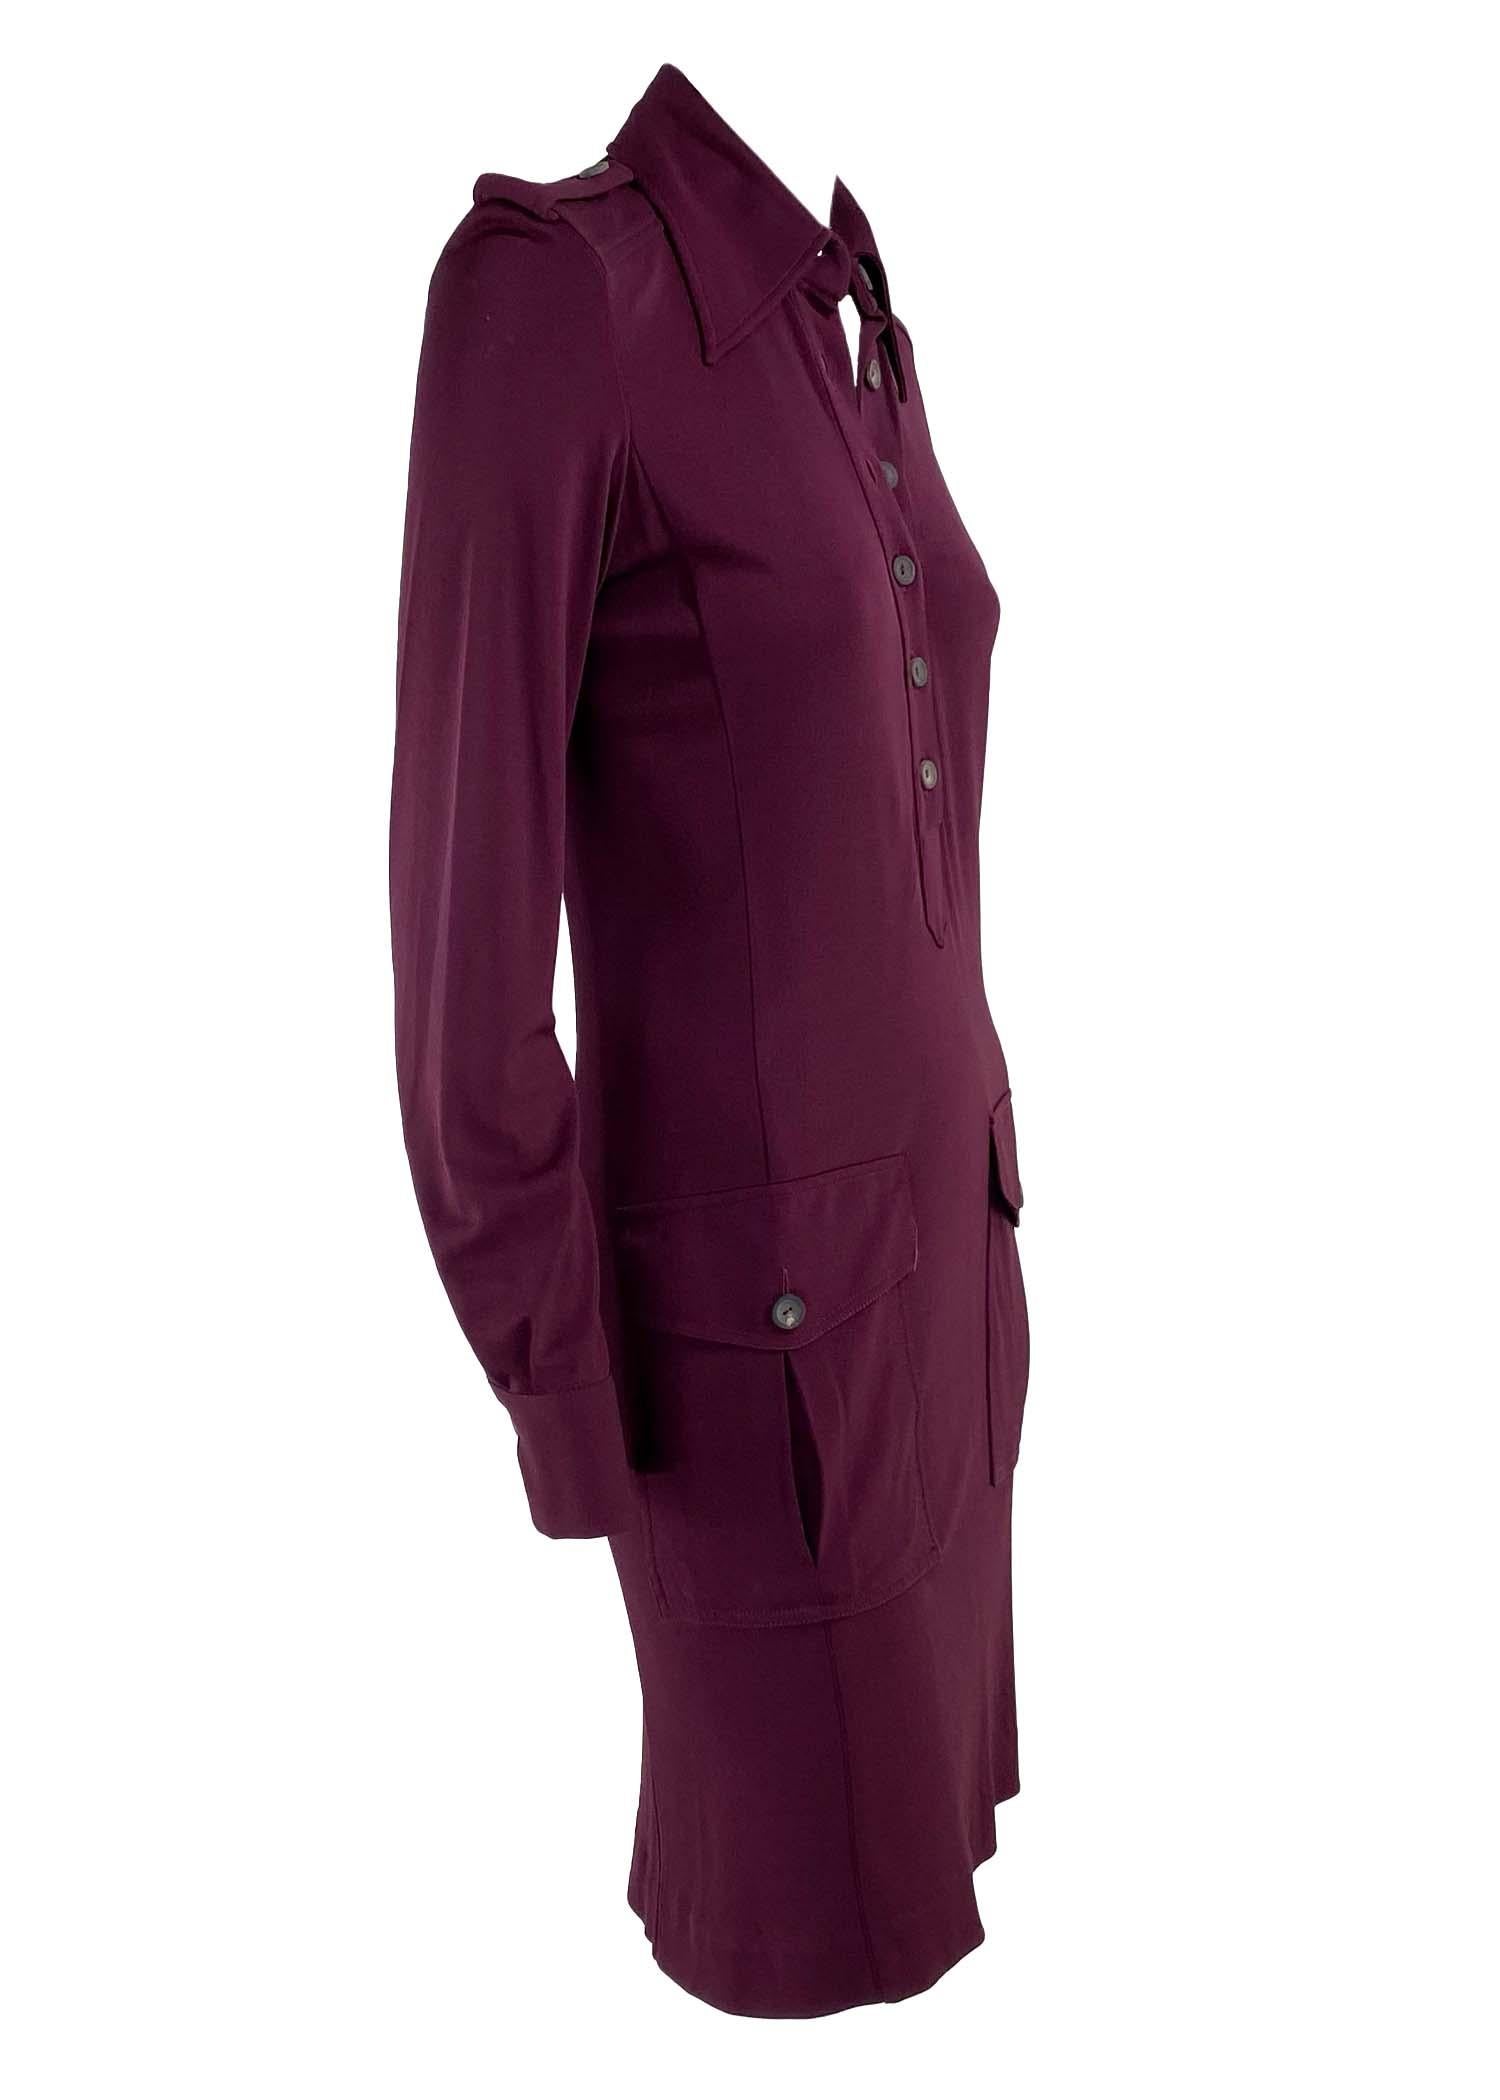 F/W 1996 Gucci by Tom Ford Burgundy Military Inspired Button Up Pocket Dress (Robe à poches boutonnées d'inspiration militaire) Excellent état - En vente à West Hollywood, CA